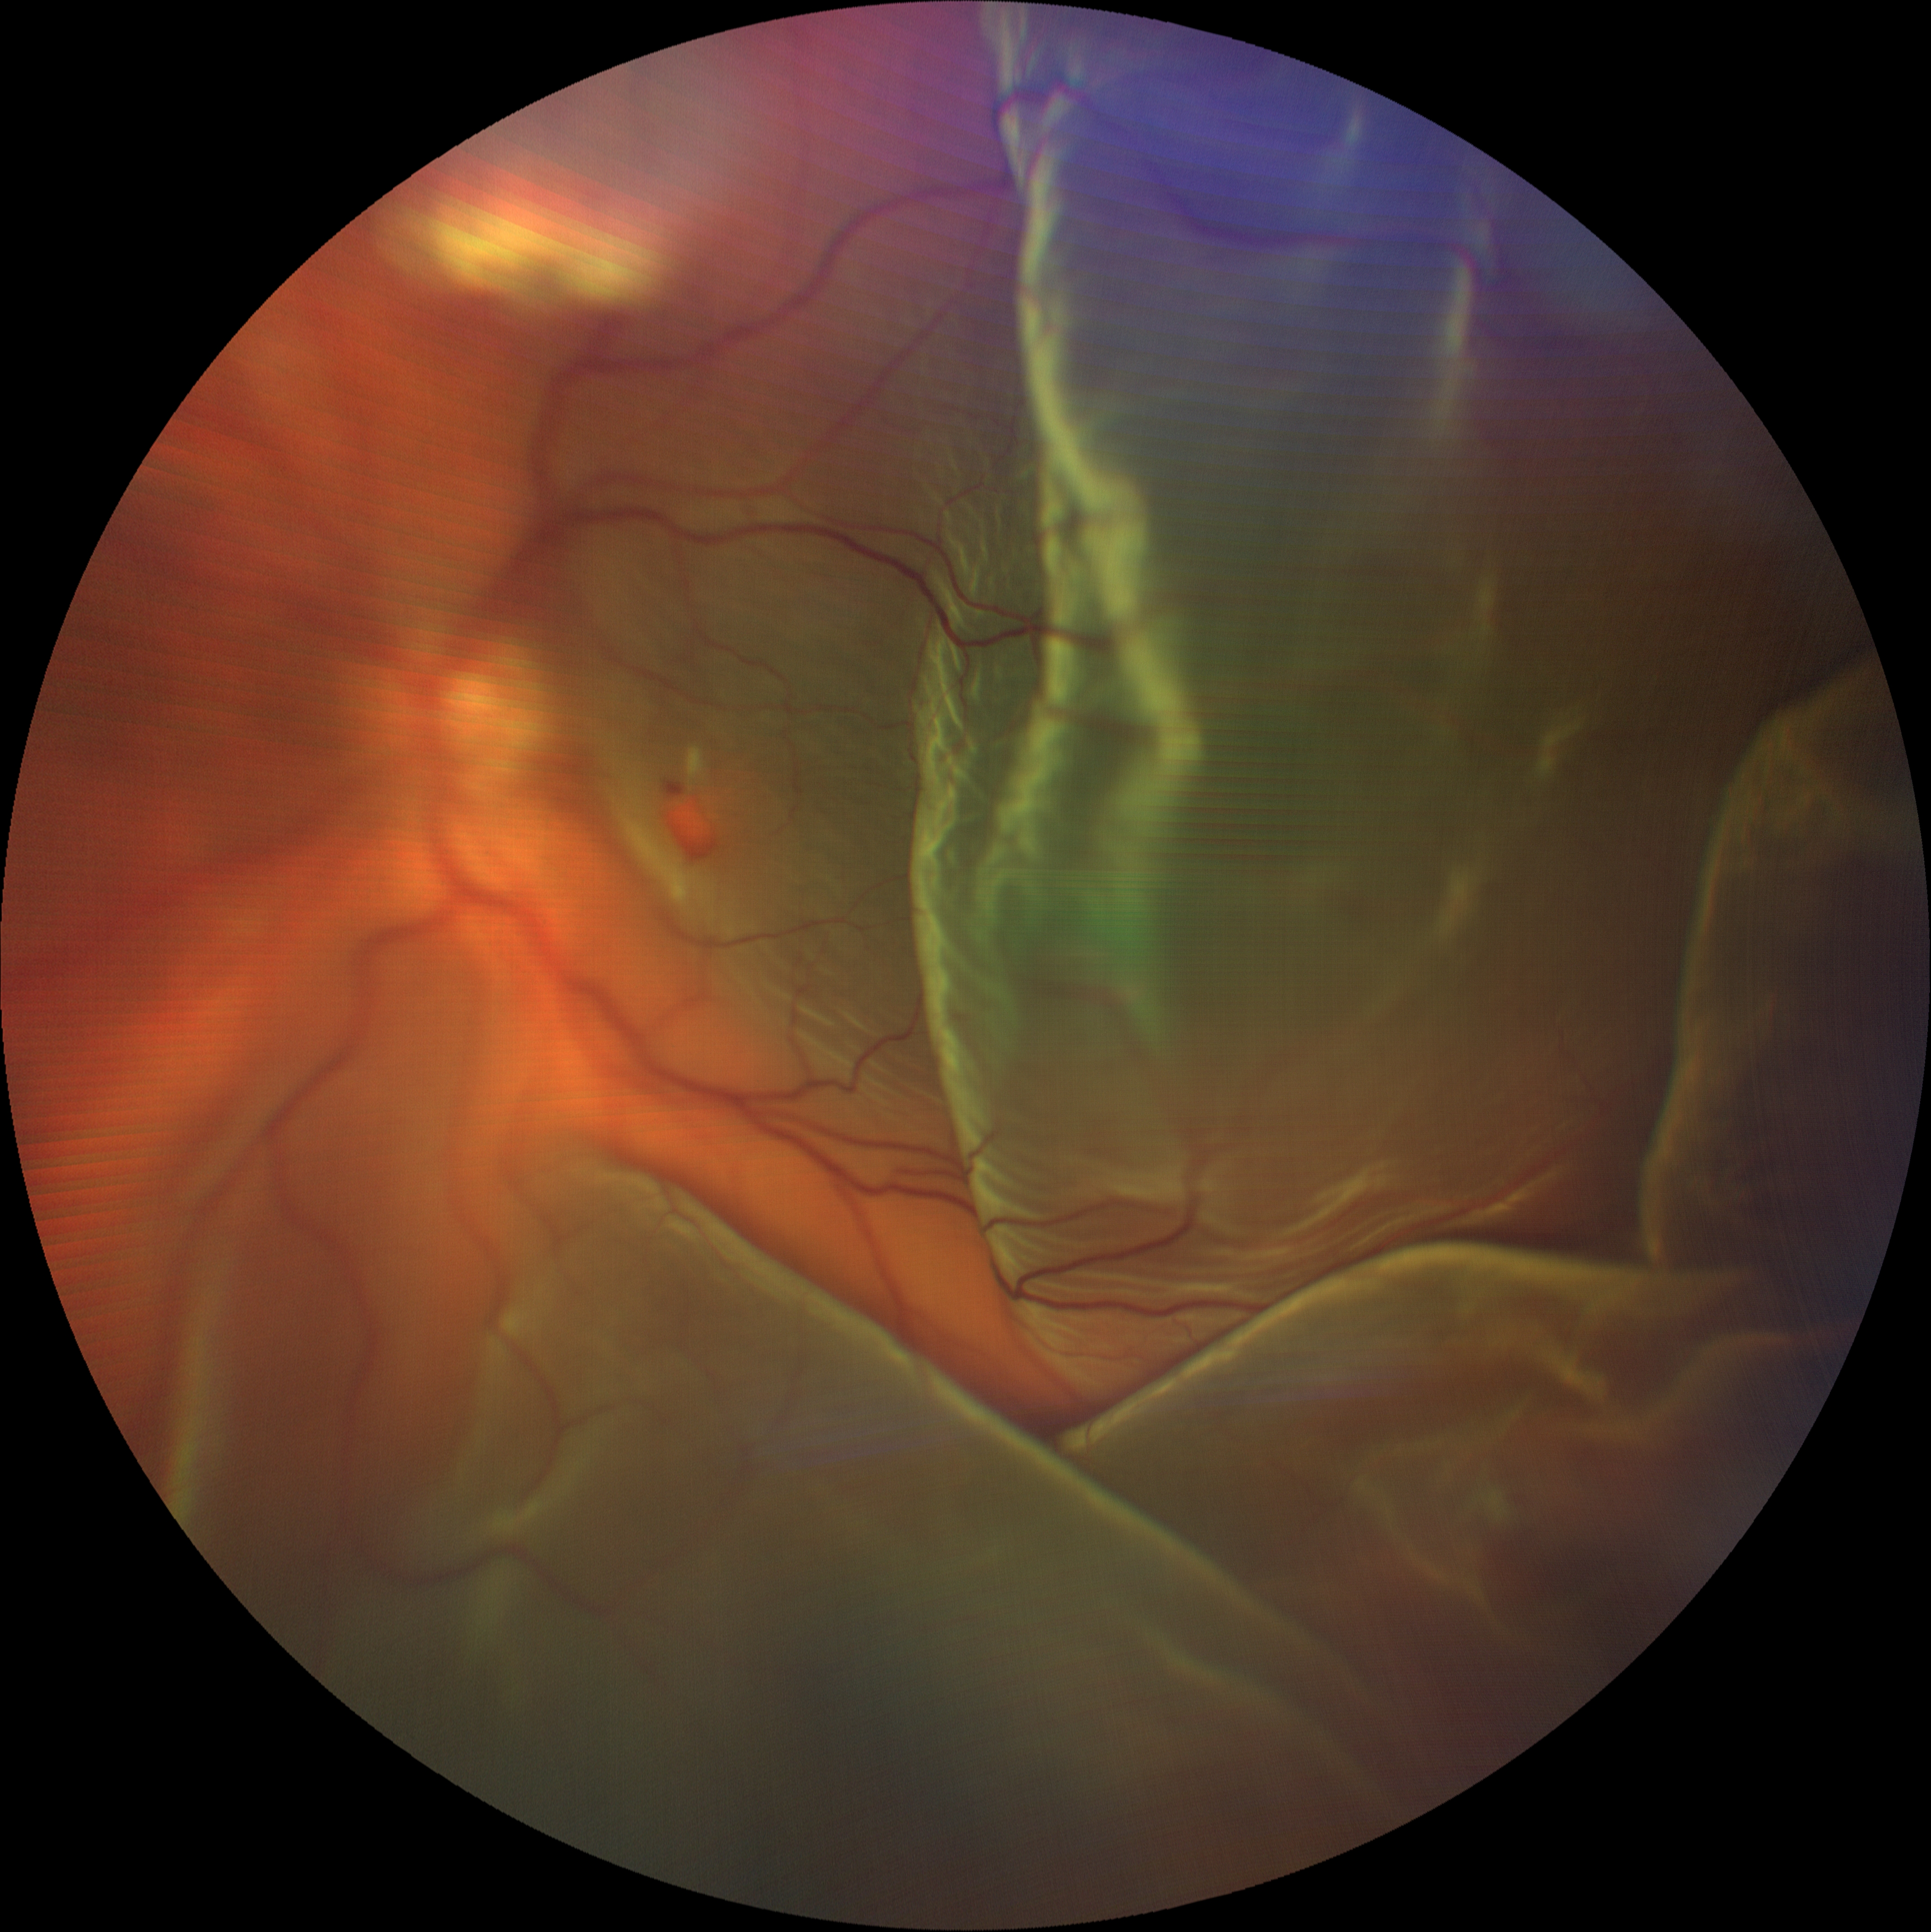 A 61-year-old Native American female was diagnosed with rhegmatogenous retinal detachment associated with macular hole in her left eye. She was referred to a retina specialist for retinal detachment repair with pars plana vitrectomy. Recurrent retinal detachment with proliferative vitreoretinopathy was noted at her follow-up visit.